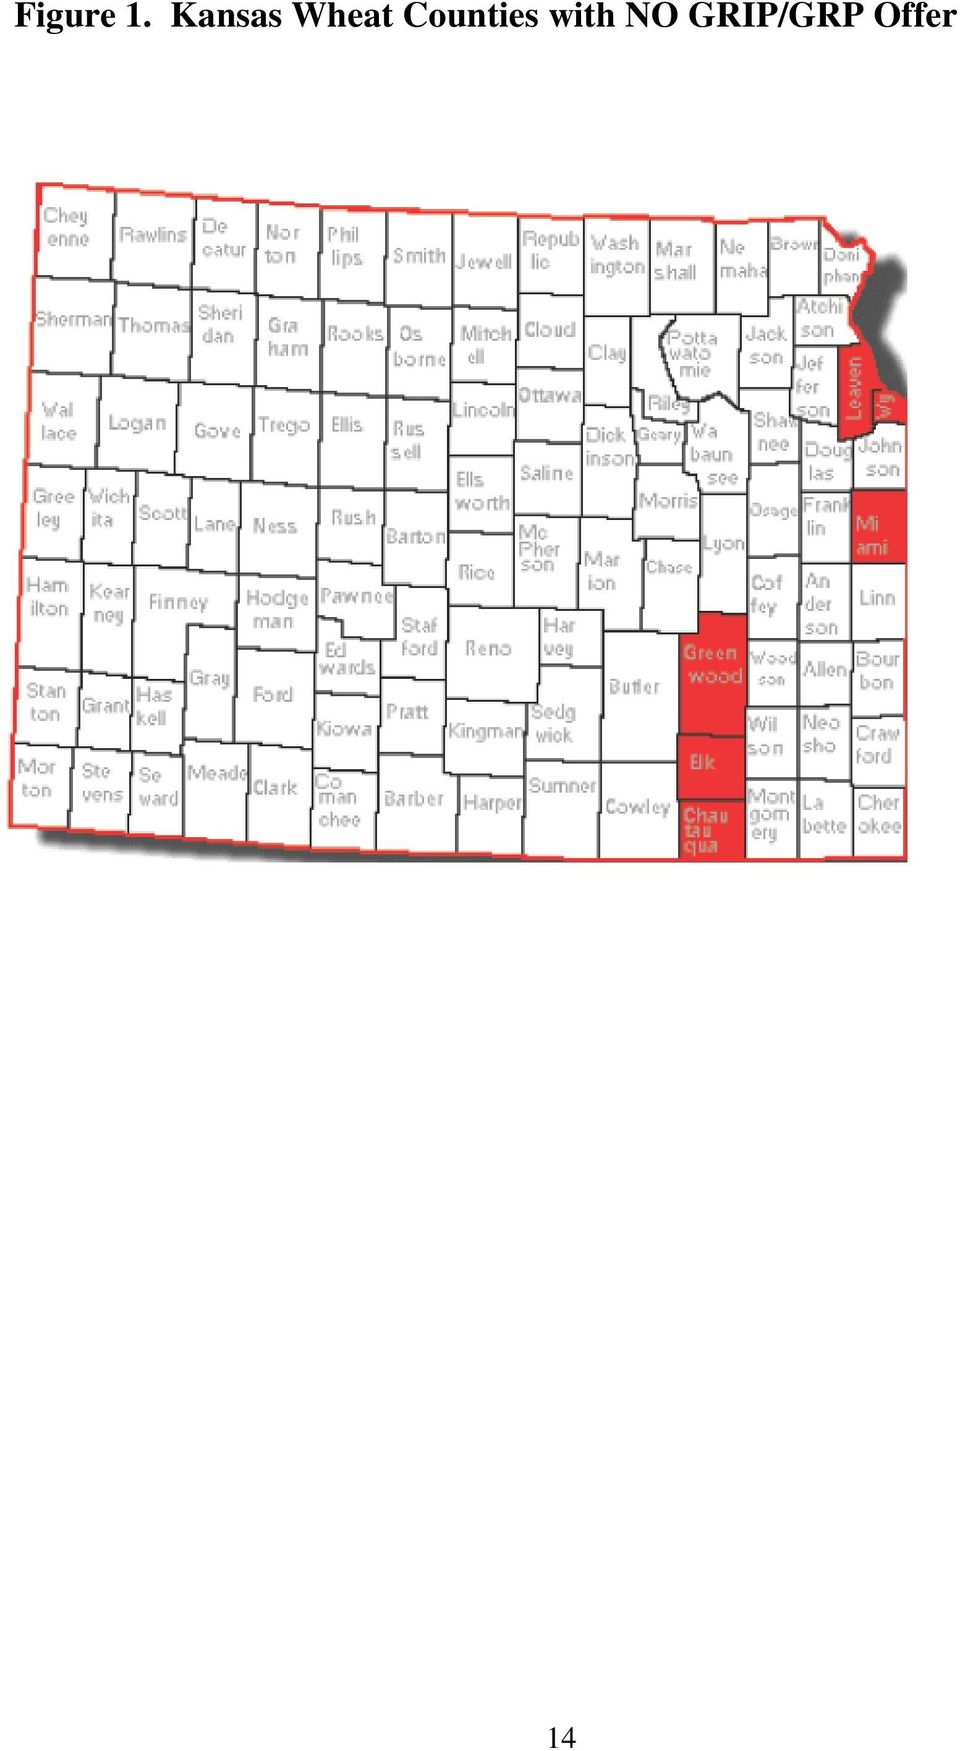 Counties with